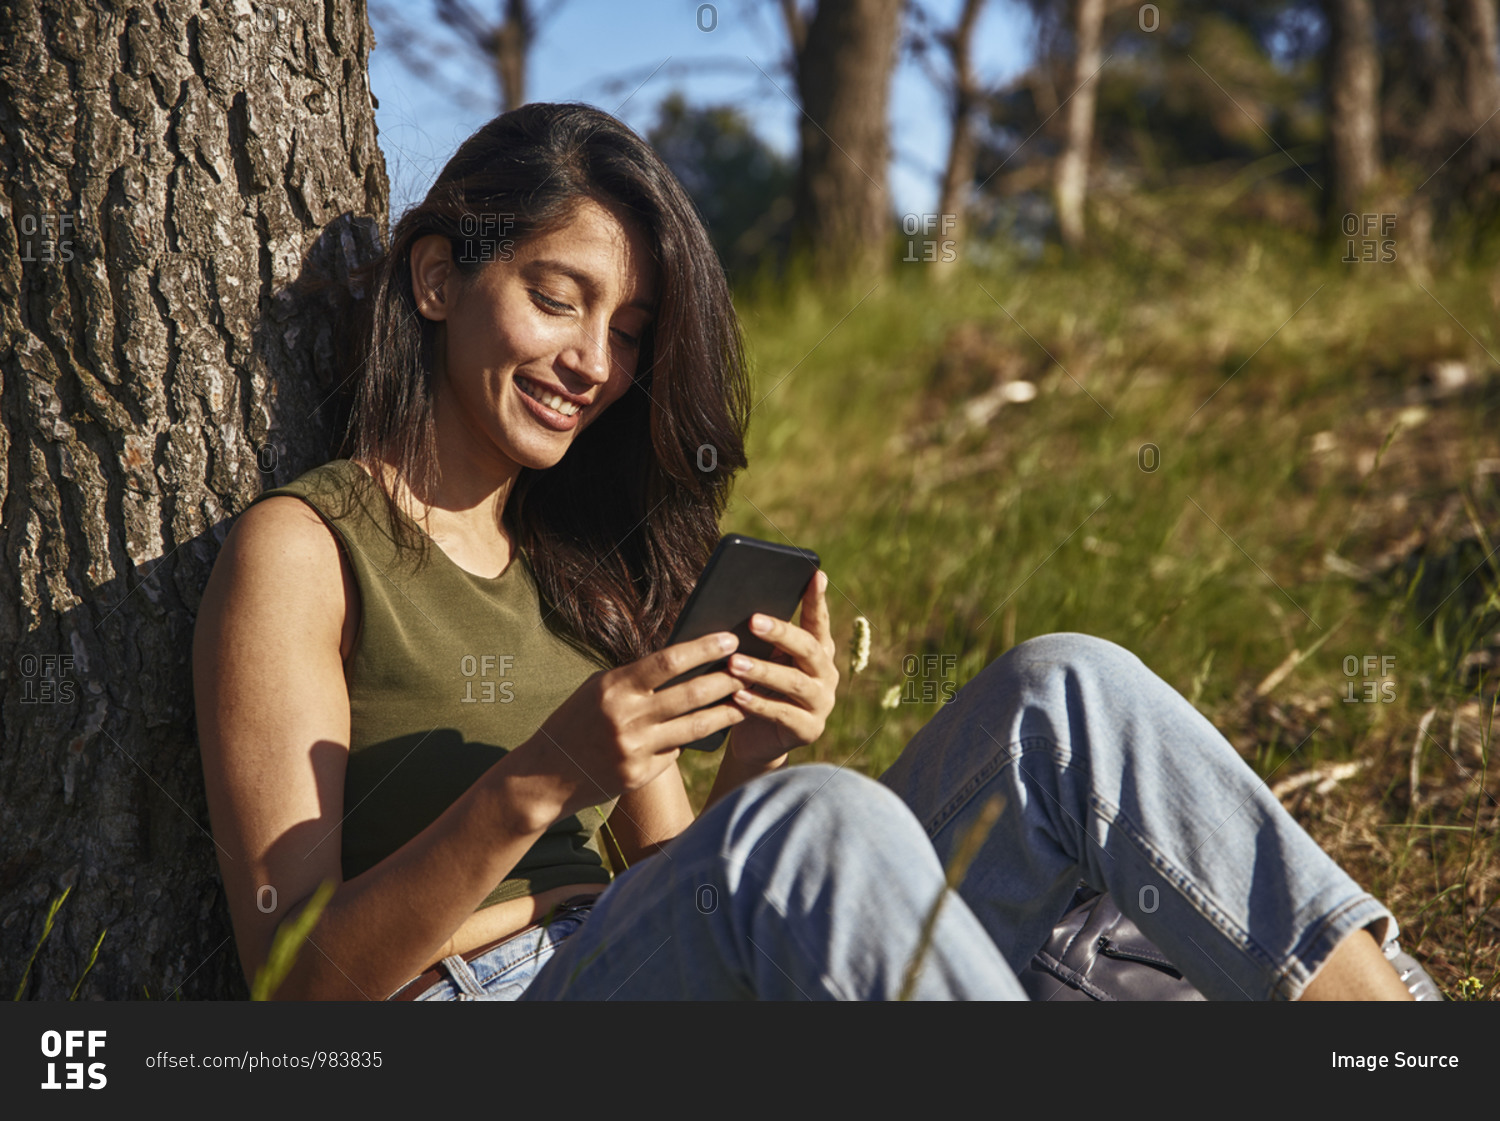 Portrait of young woman with long brown hair sitting under a tree in a forest, checking mobile phone.